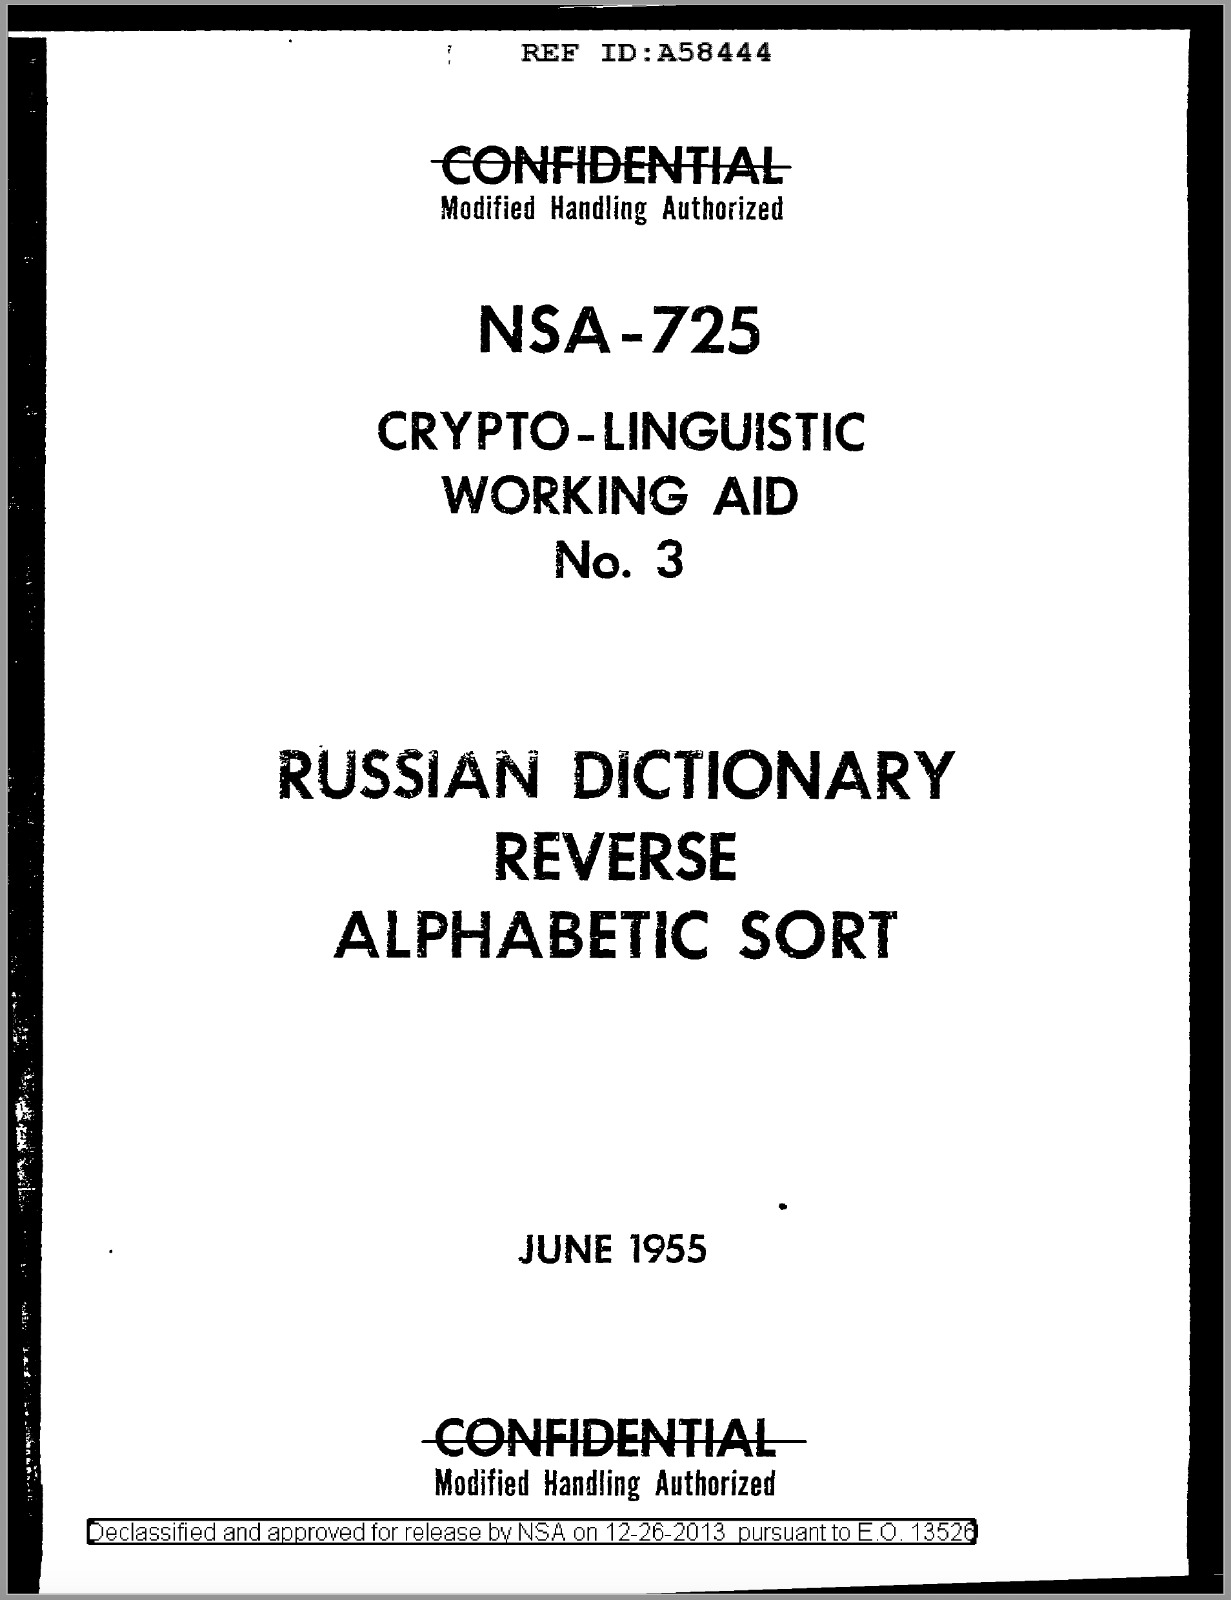 634 Page 1955 CRYPTO-LINGUISTIC WORKING AID No. 3 RUSSIAN DICTIONARY BOOK on CD